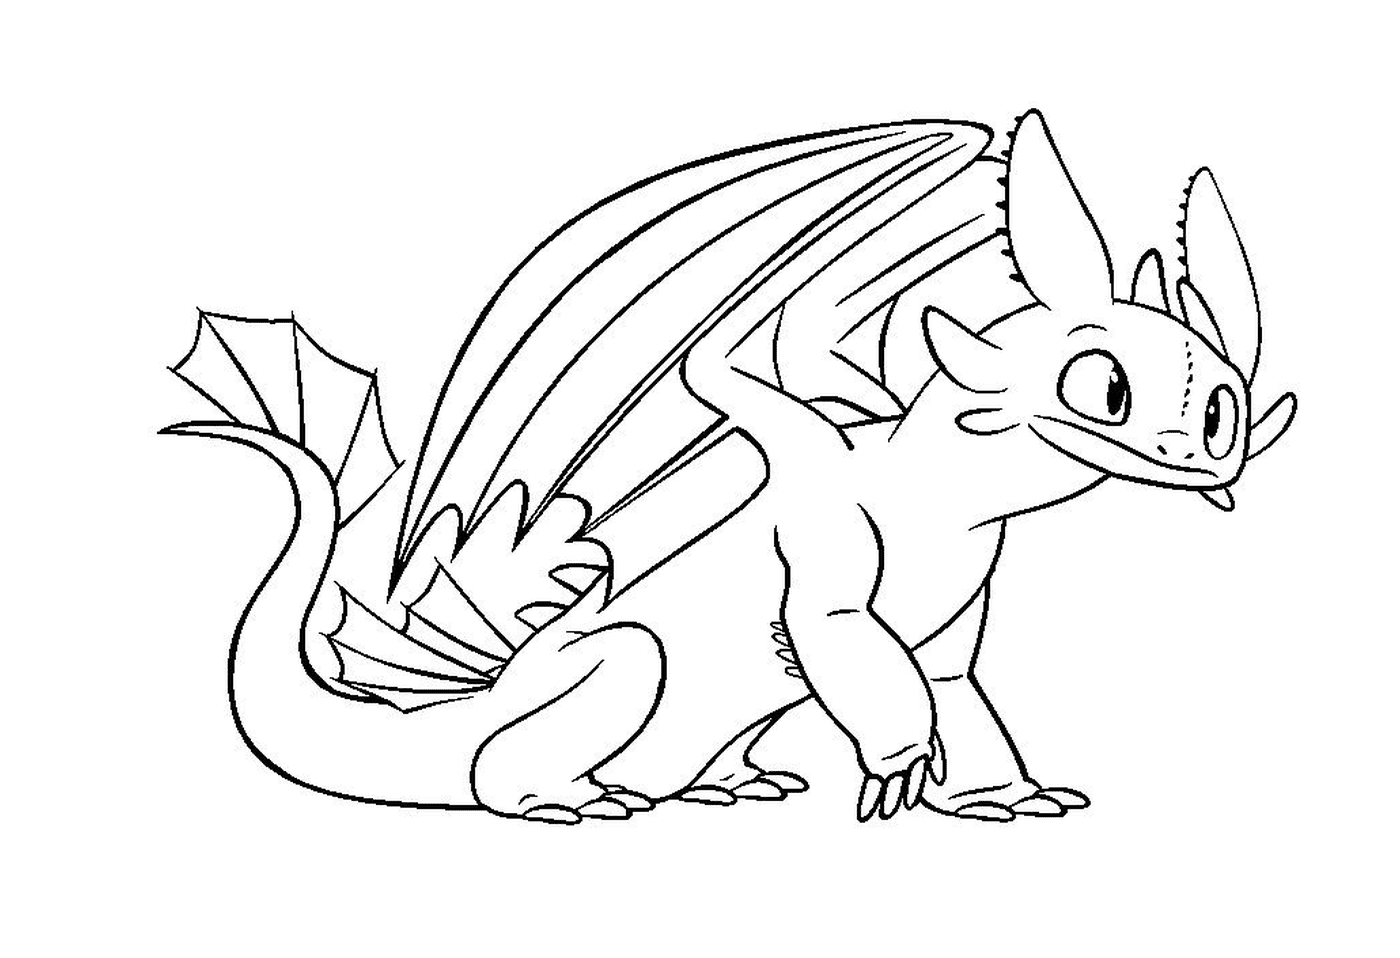  Toothless, a Nocturne Furie dragon 